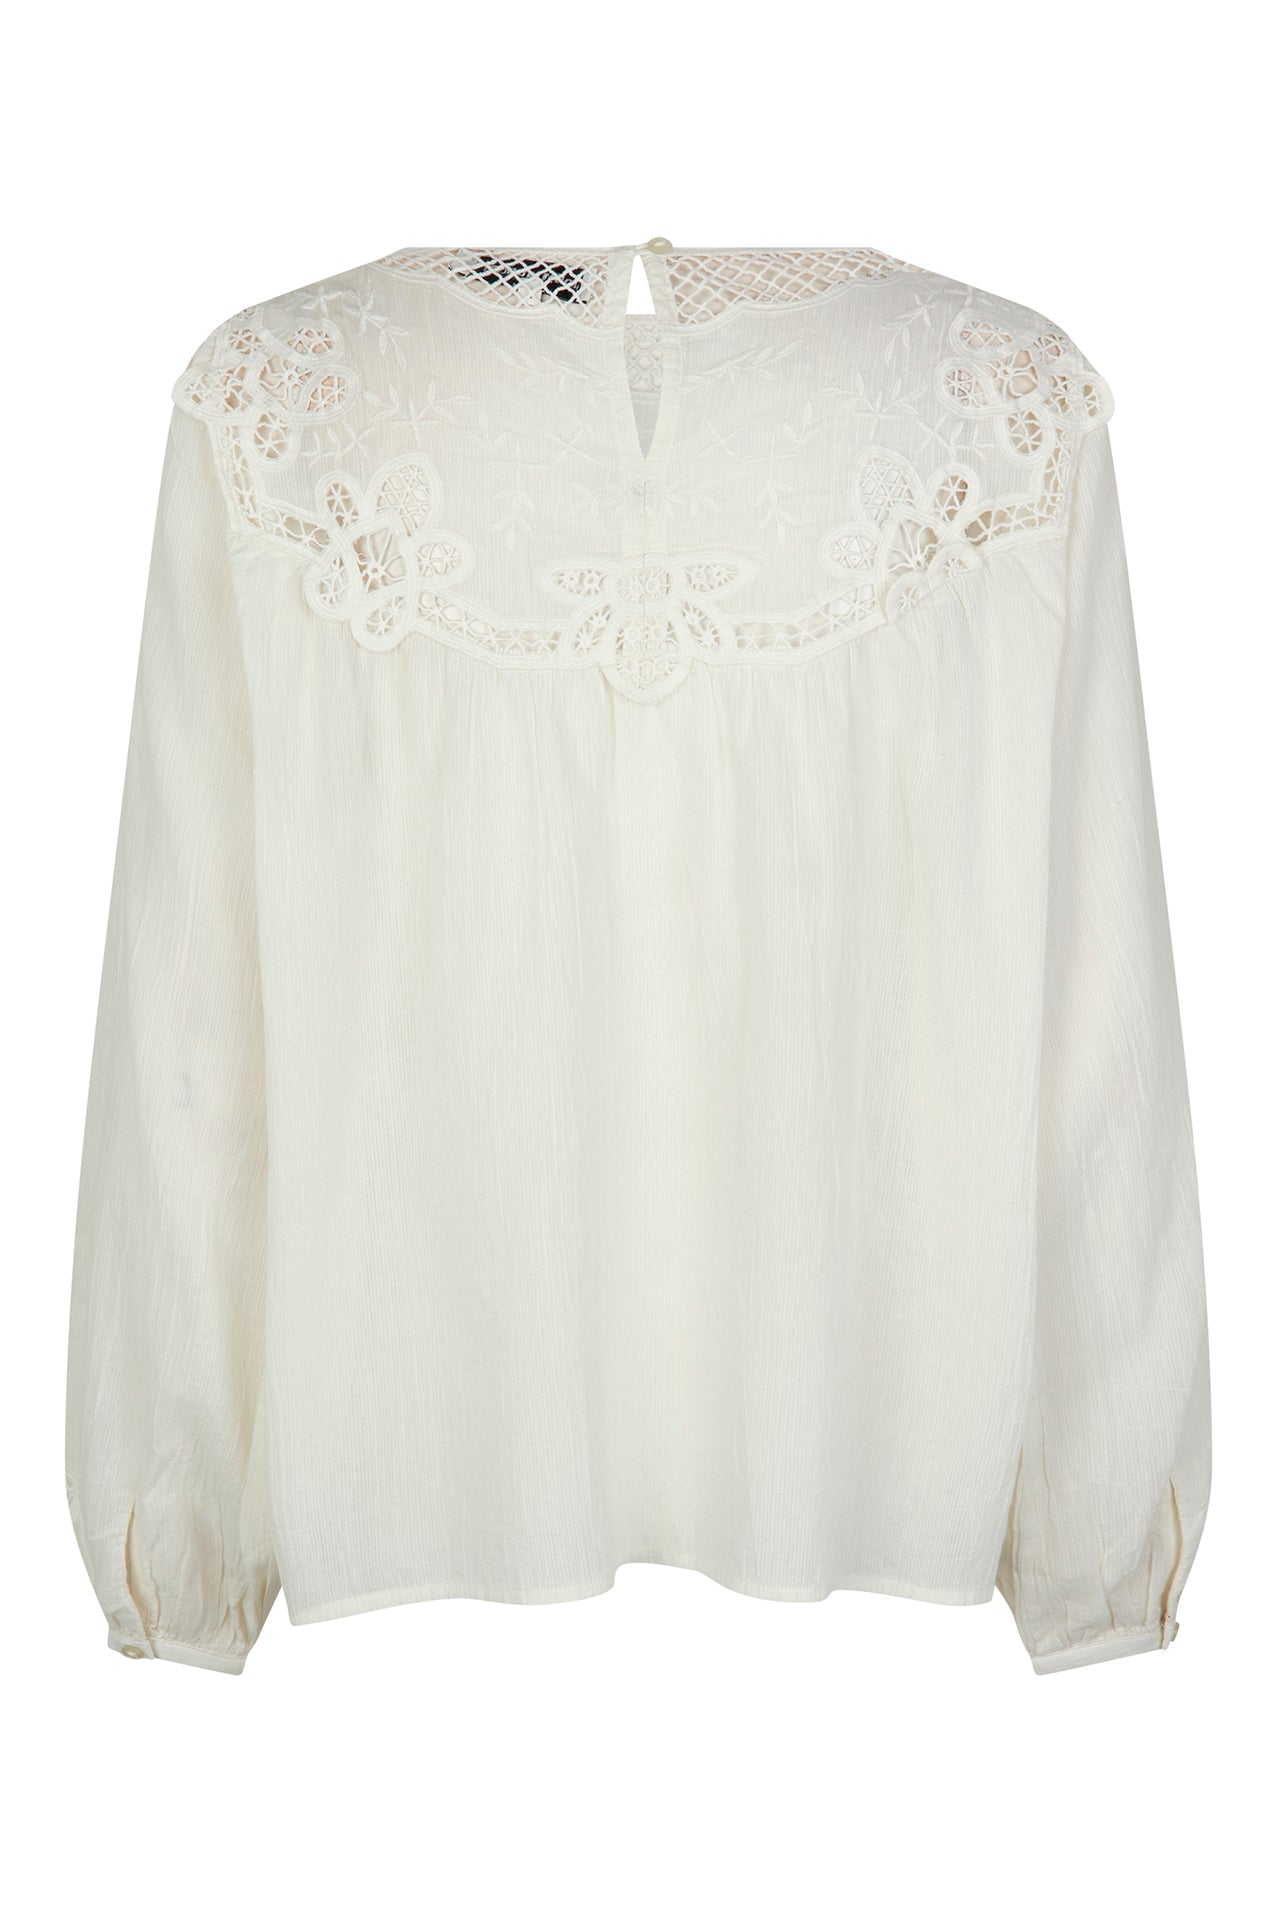 Lollys Laundry MayLL Blouse LS Top 02 Creme